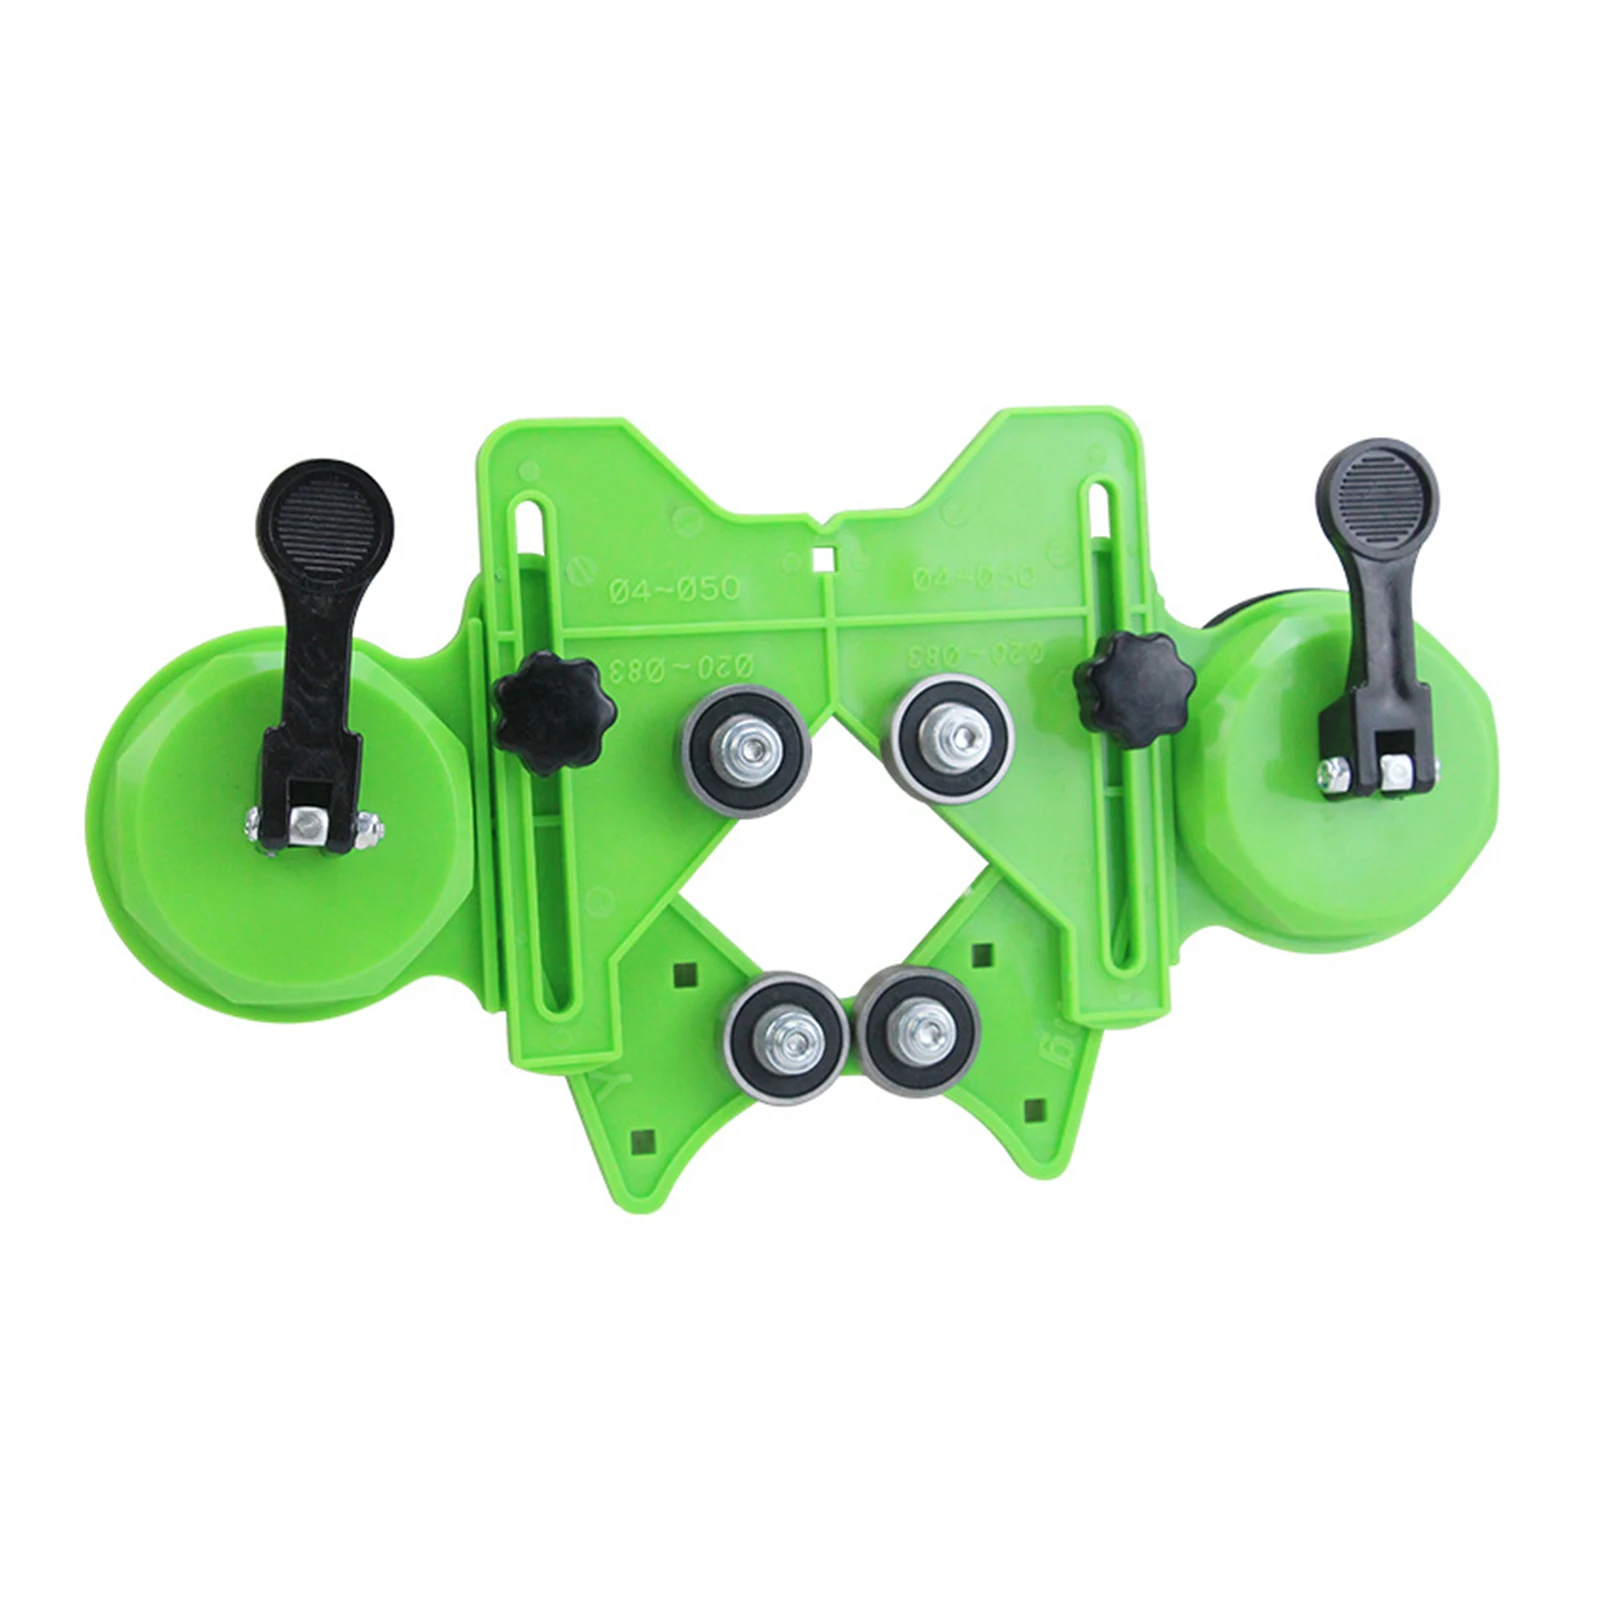 

4-84mm Drill Guide Openings Portable Adjustable Hole Locator Multifunctional Glass Tiles Home Centering Jig Fixture Easy Use